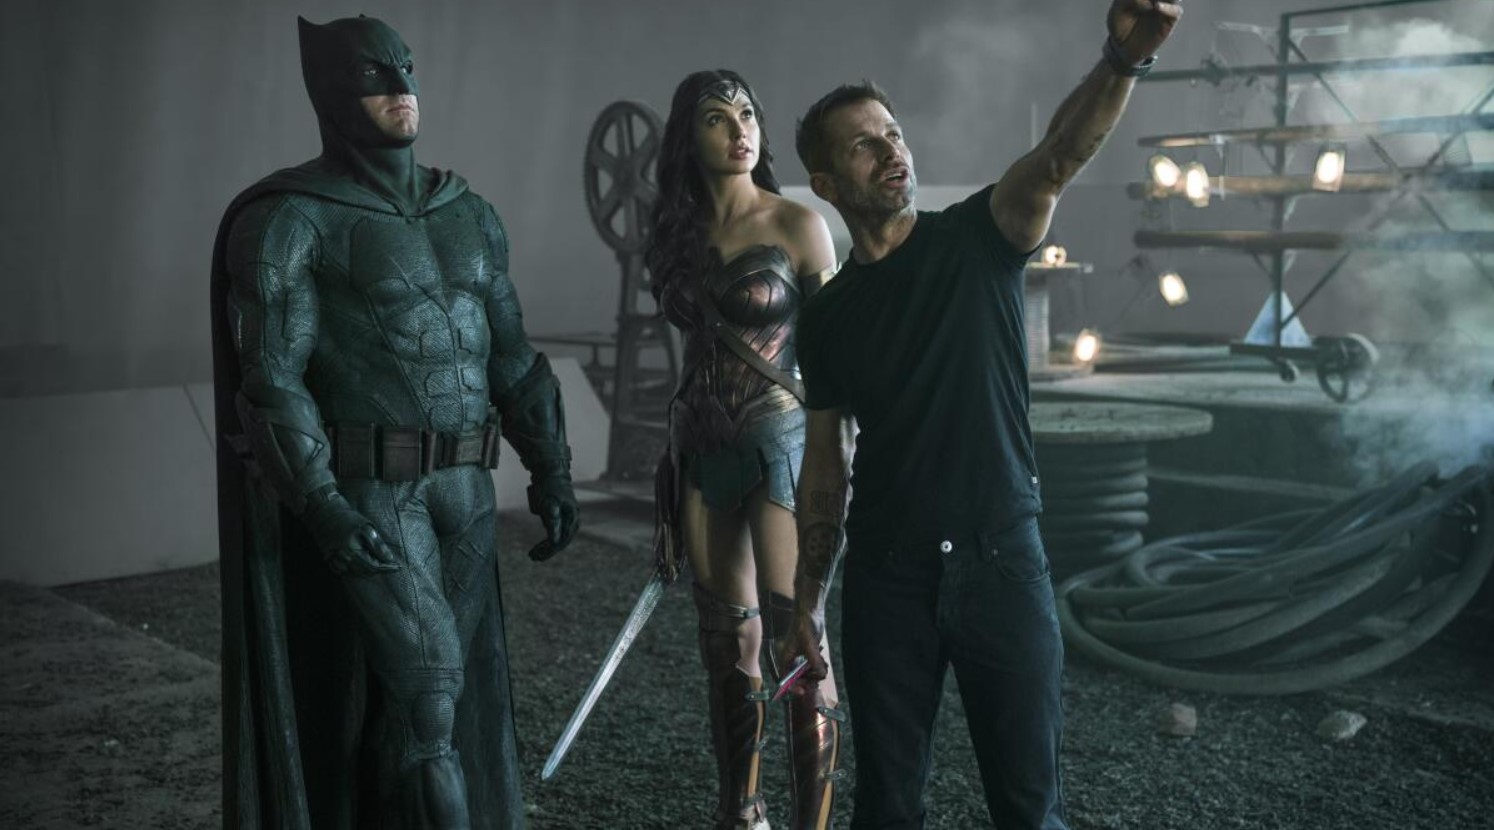 DC Fans Mark 3 Years of Zack Snyder's Justice League 2